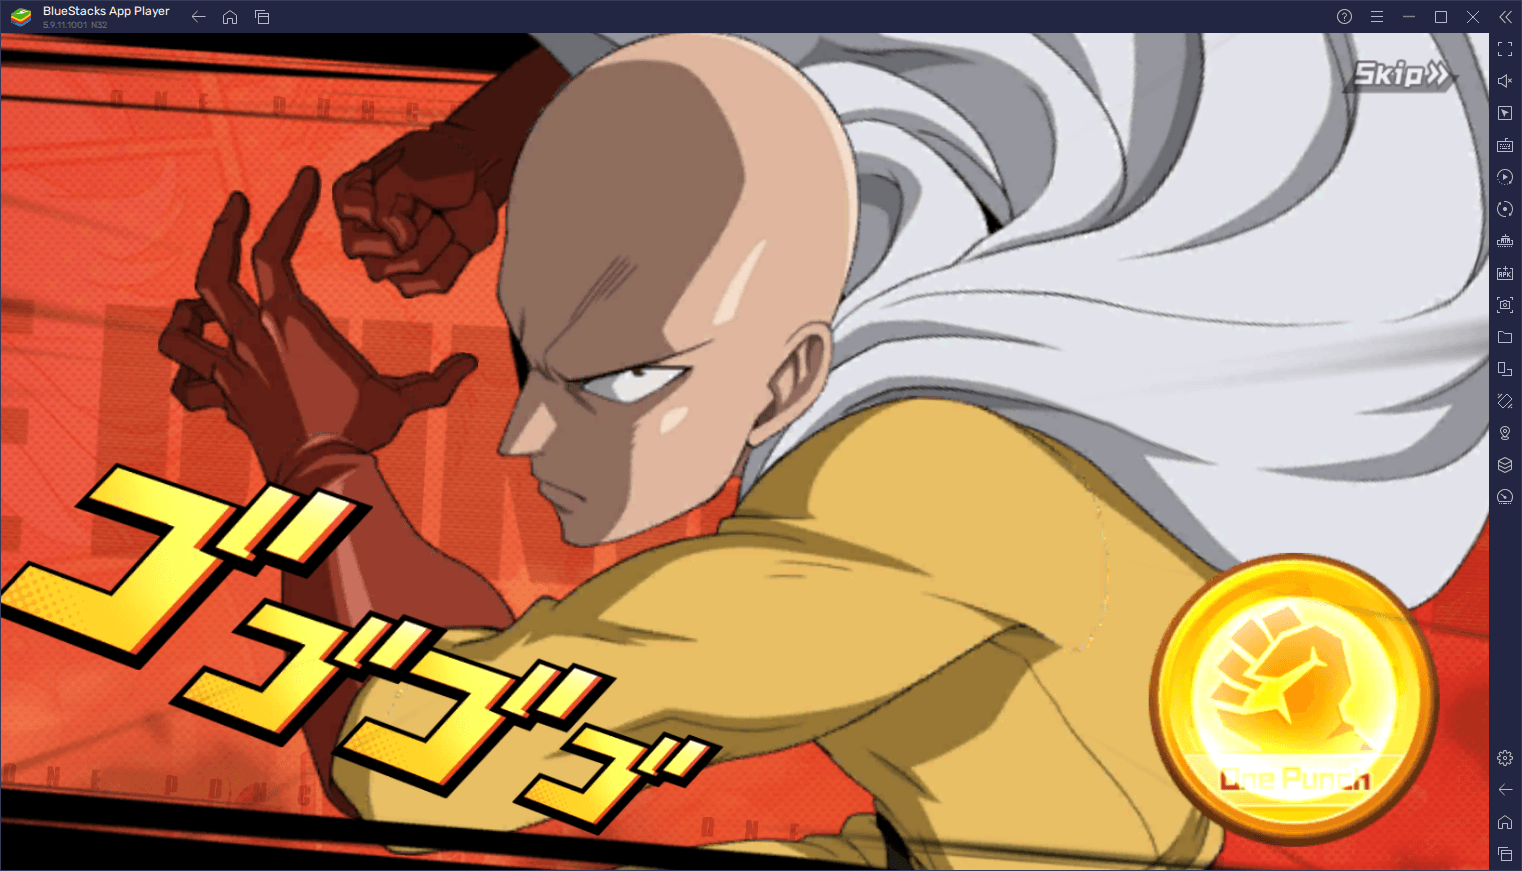 One Punch Man - The Strongest on PC - Automate and Streamline Your Gameplay Experience with Our BlueStacks Tools